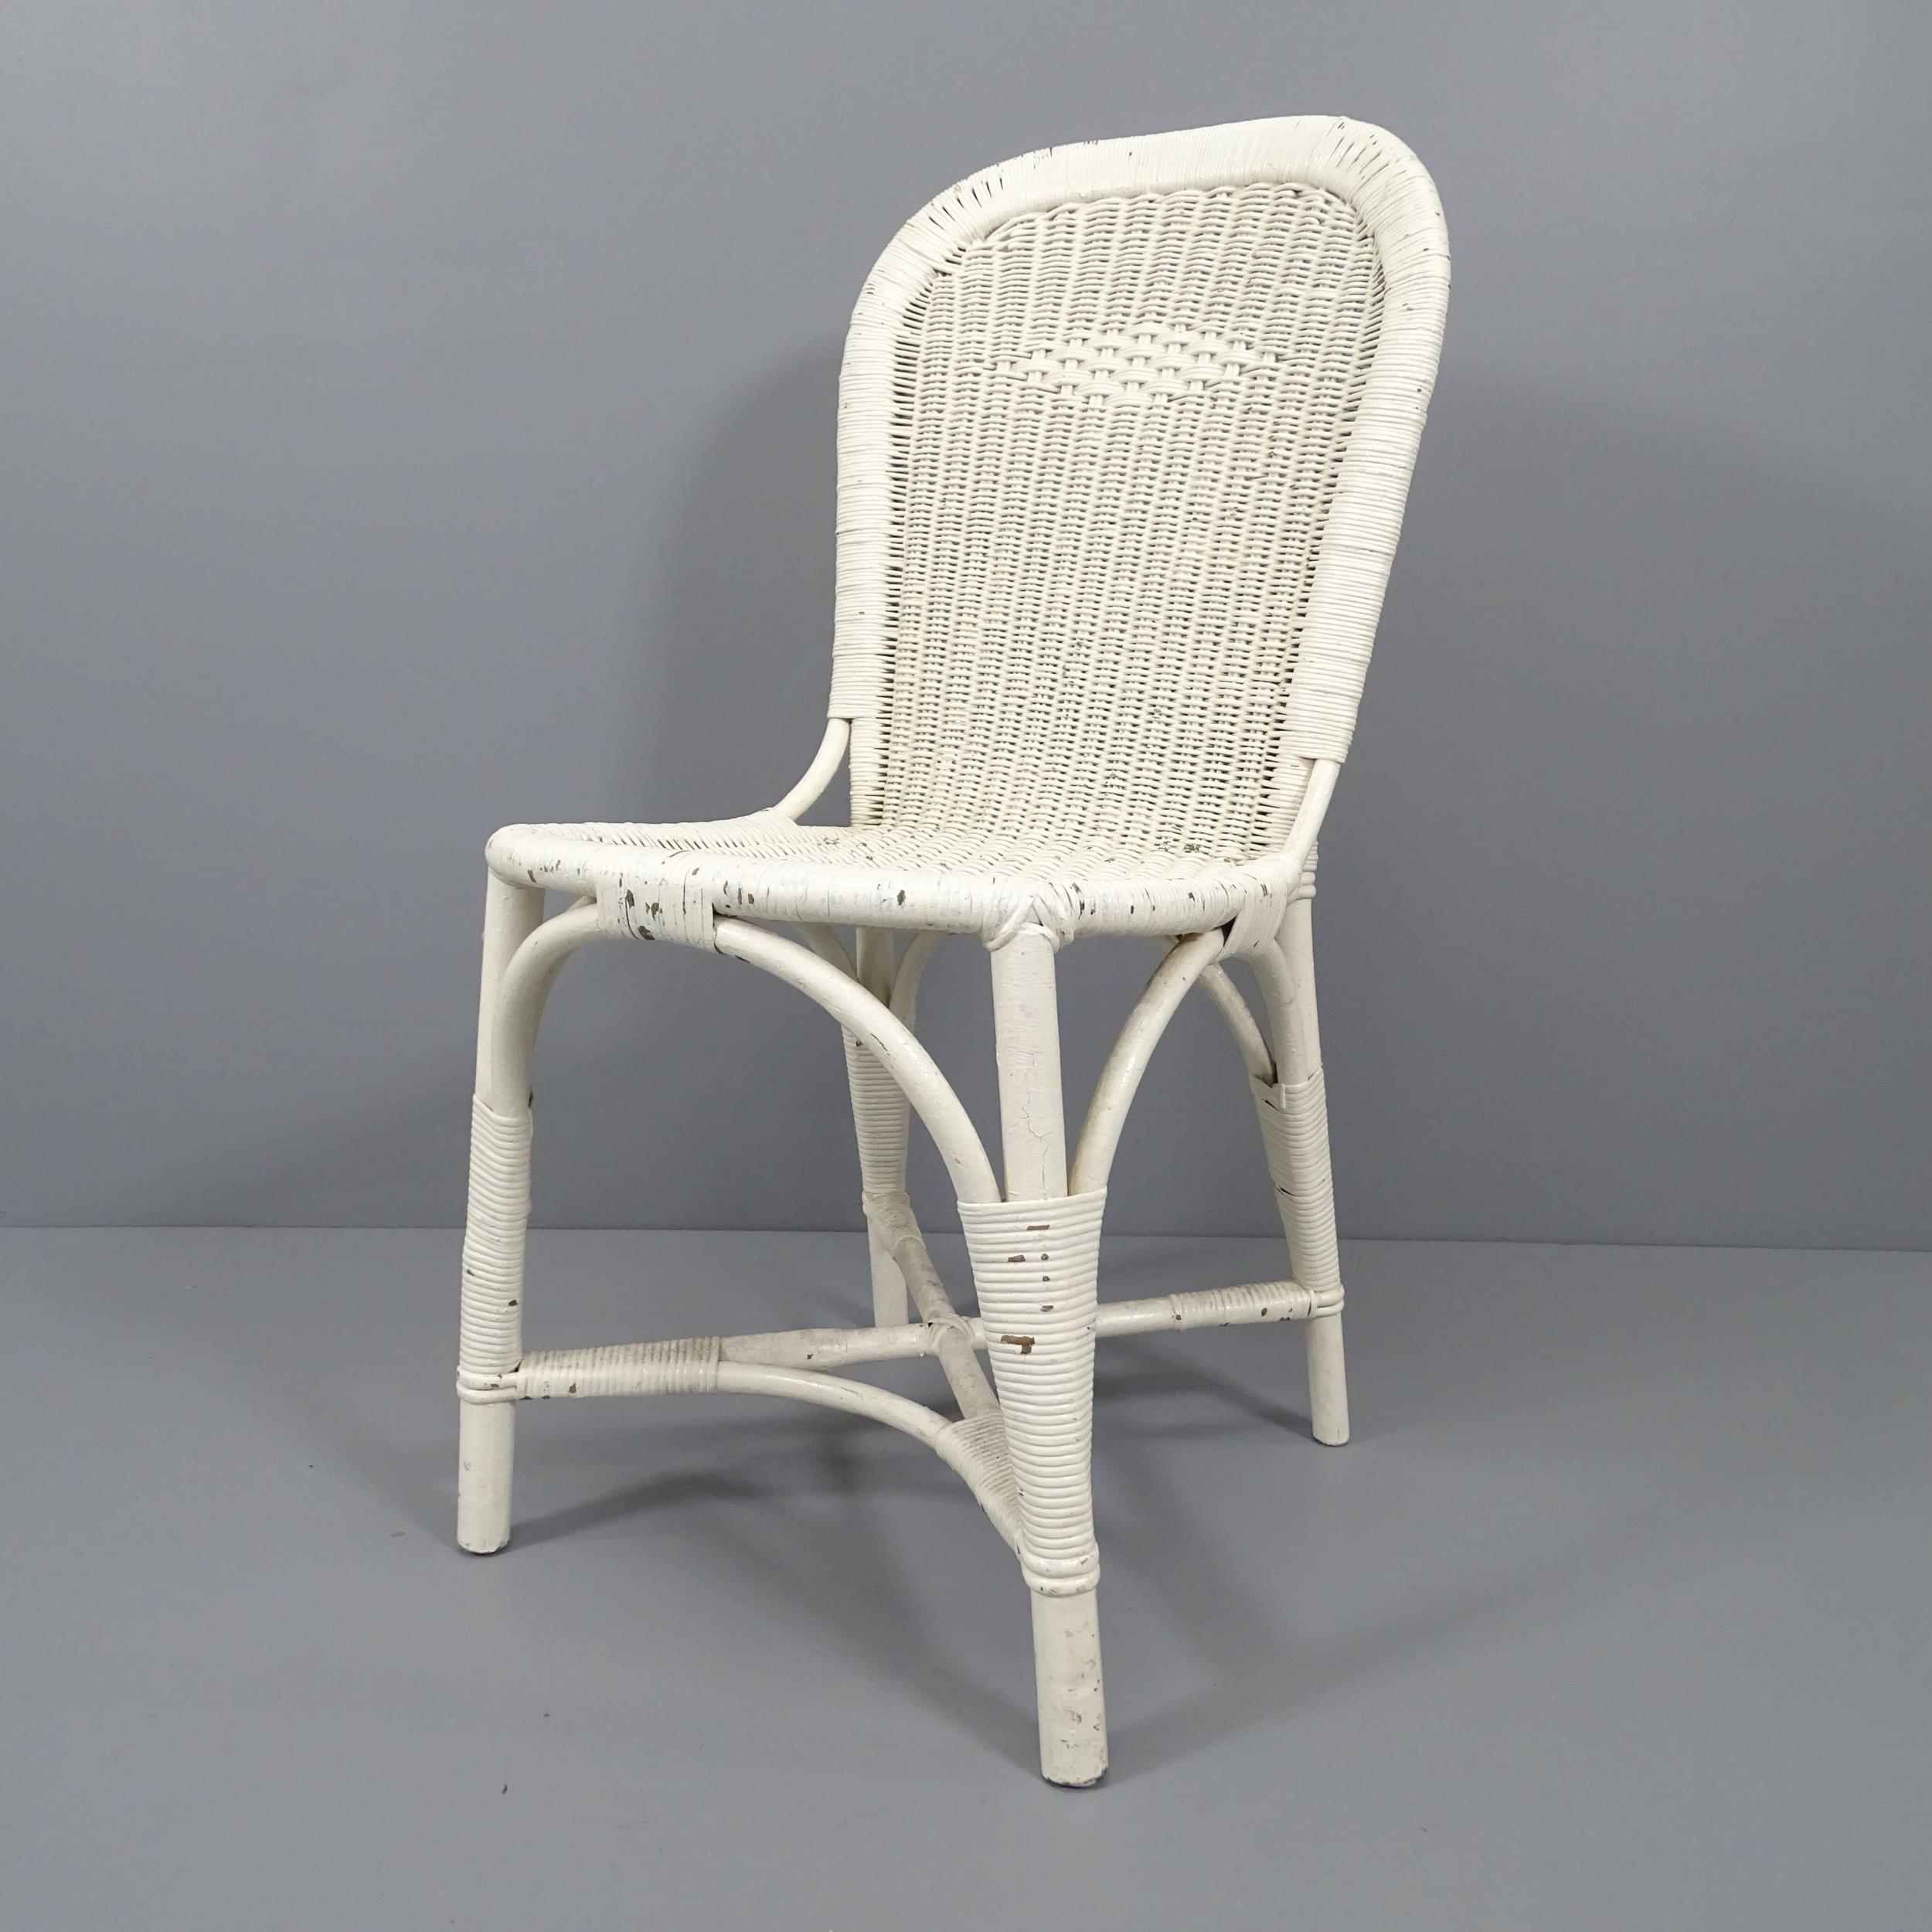 An early 20th century wicker chair by Dryad of Leicester with maker’s metal label